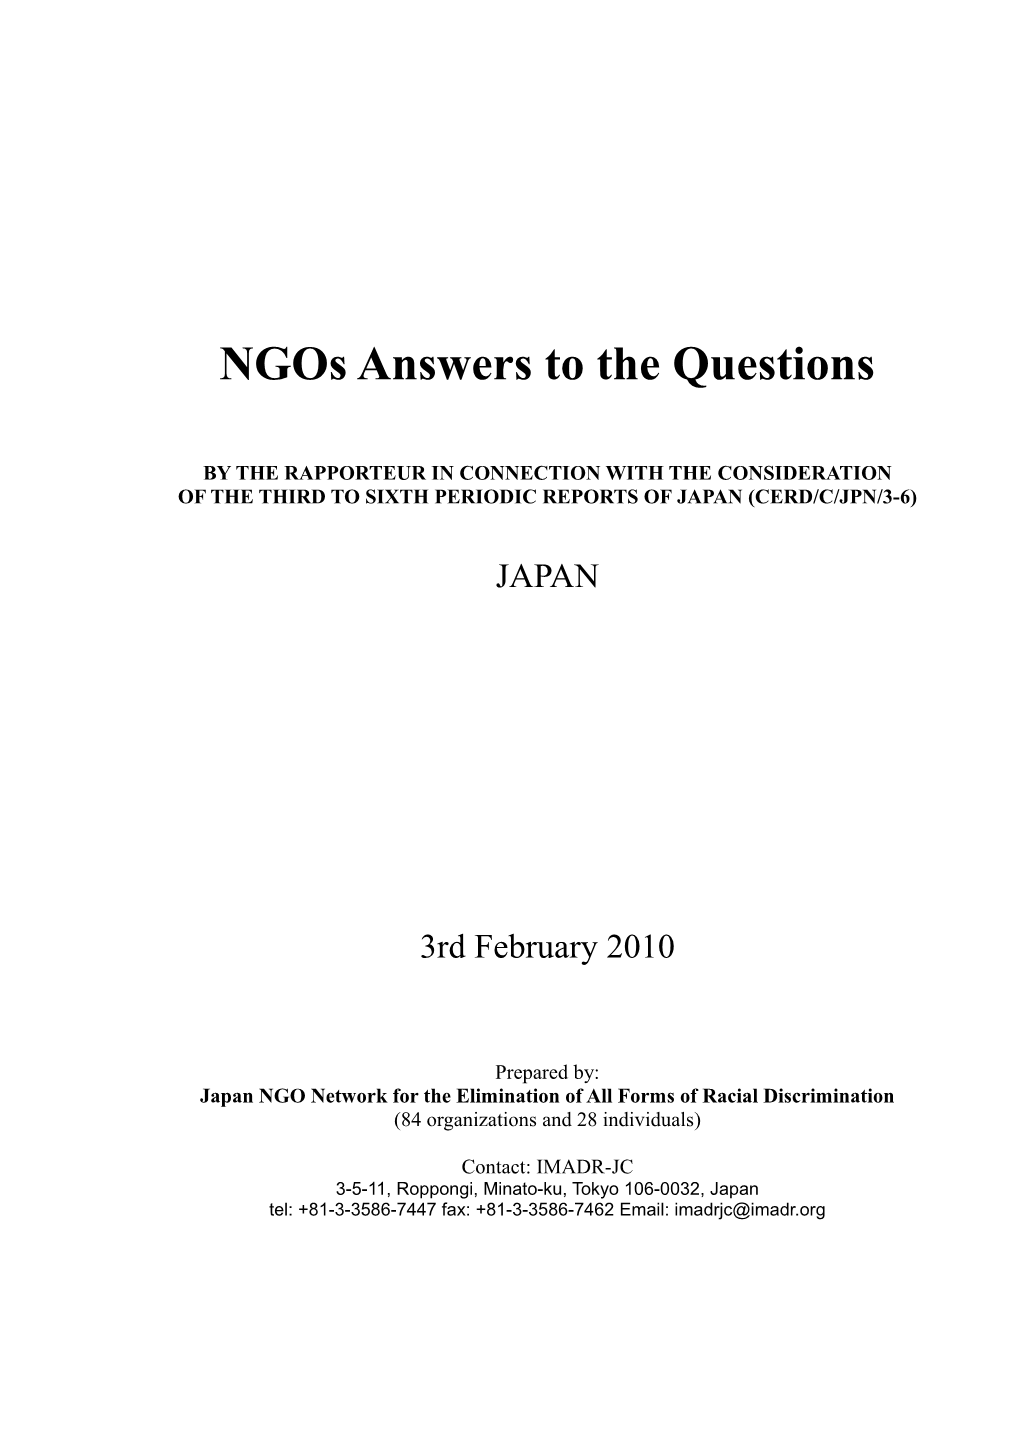 NGO Information in Line with the Questions Raised in The